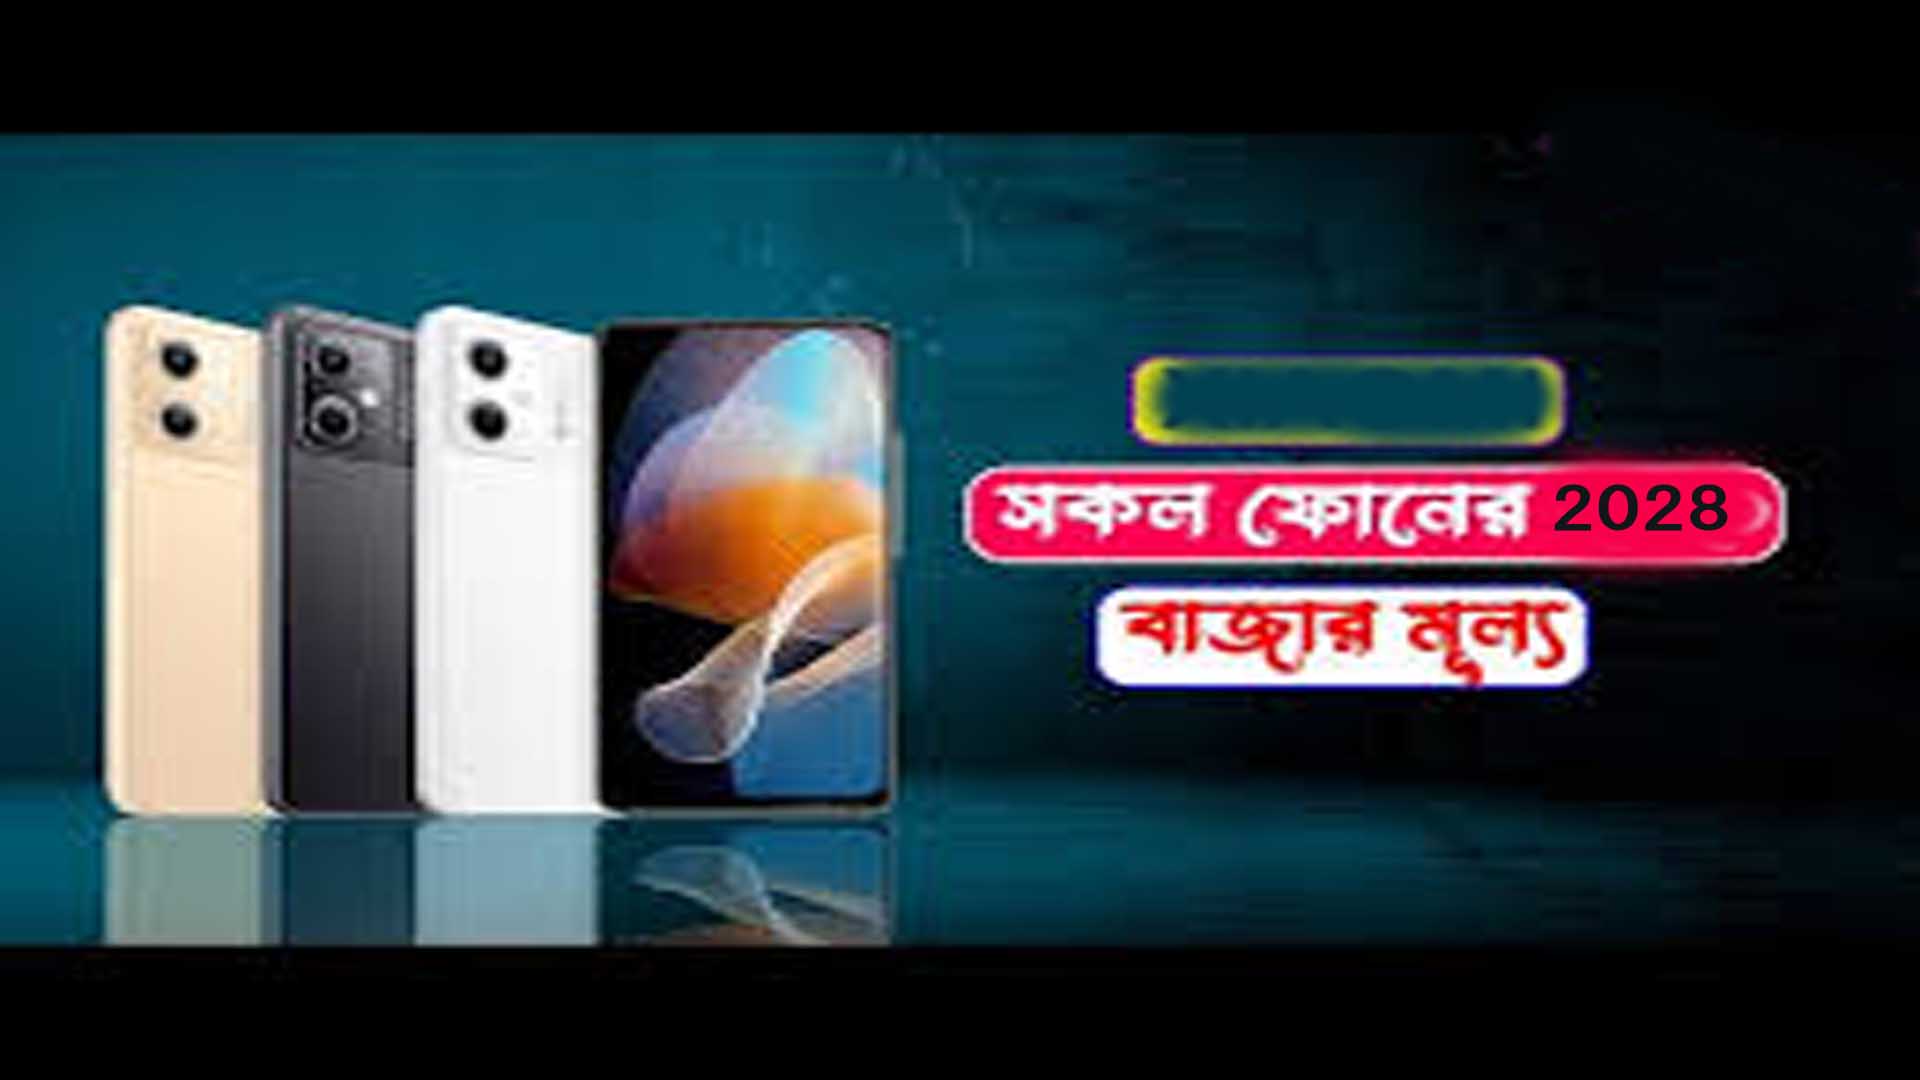 Mobile Phone Prices in Bangladesh Today 2023 |Samsung, iPhone, Xiaomi